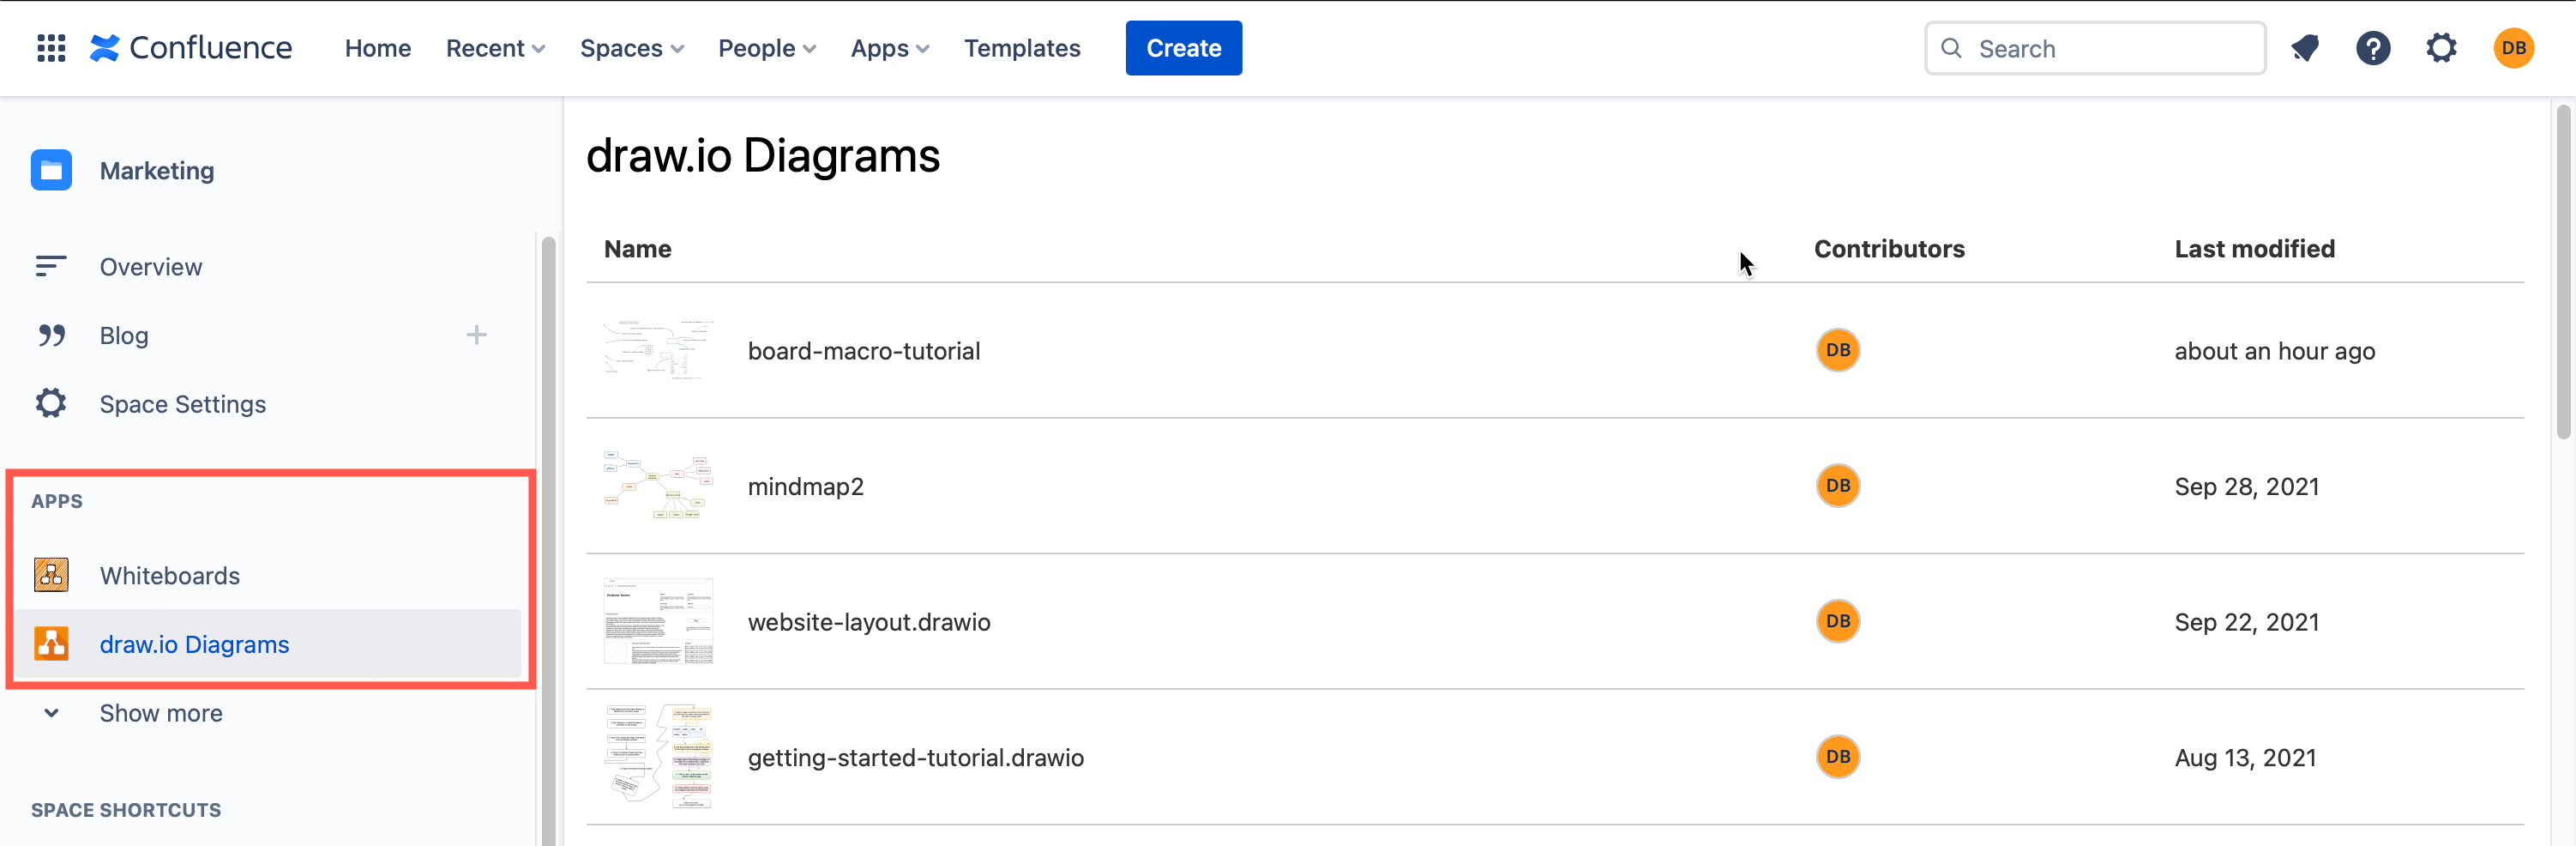 See all of the draw.io Diagrams and draw.io Boards in a Confluence Cloud instance